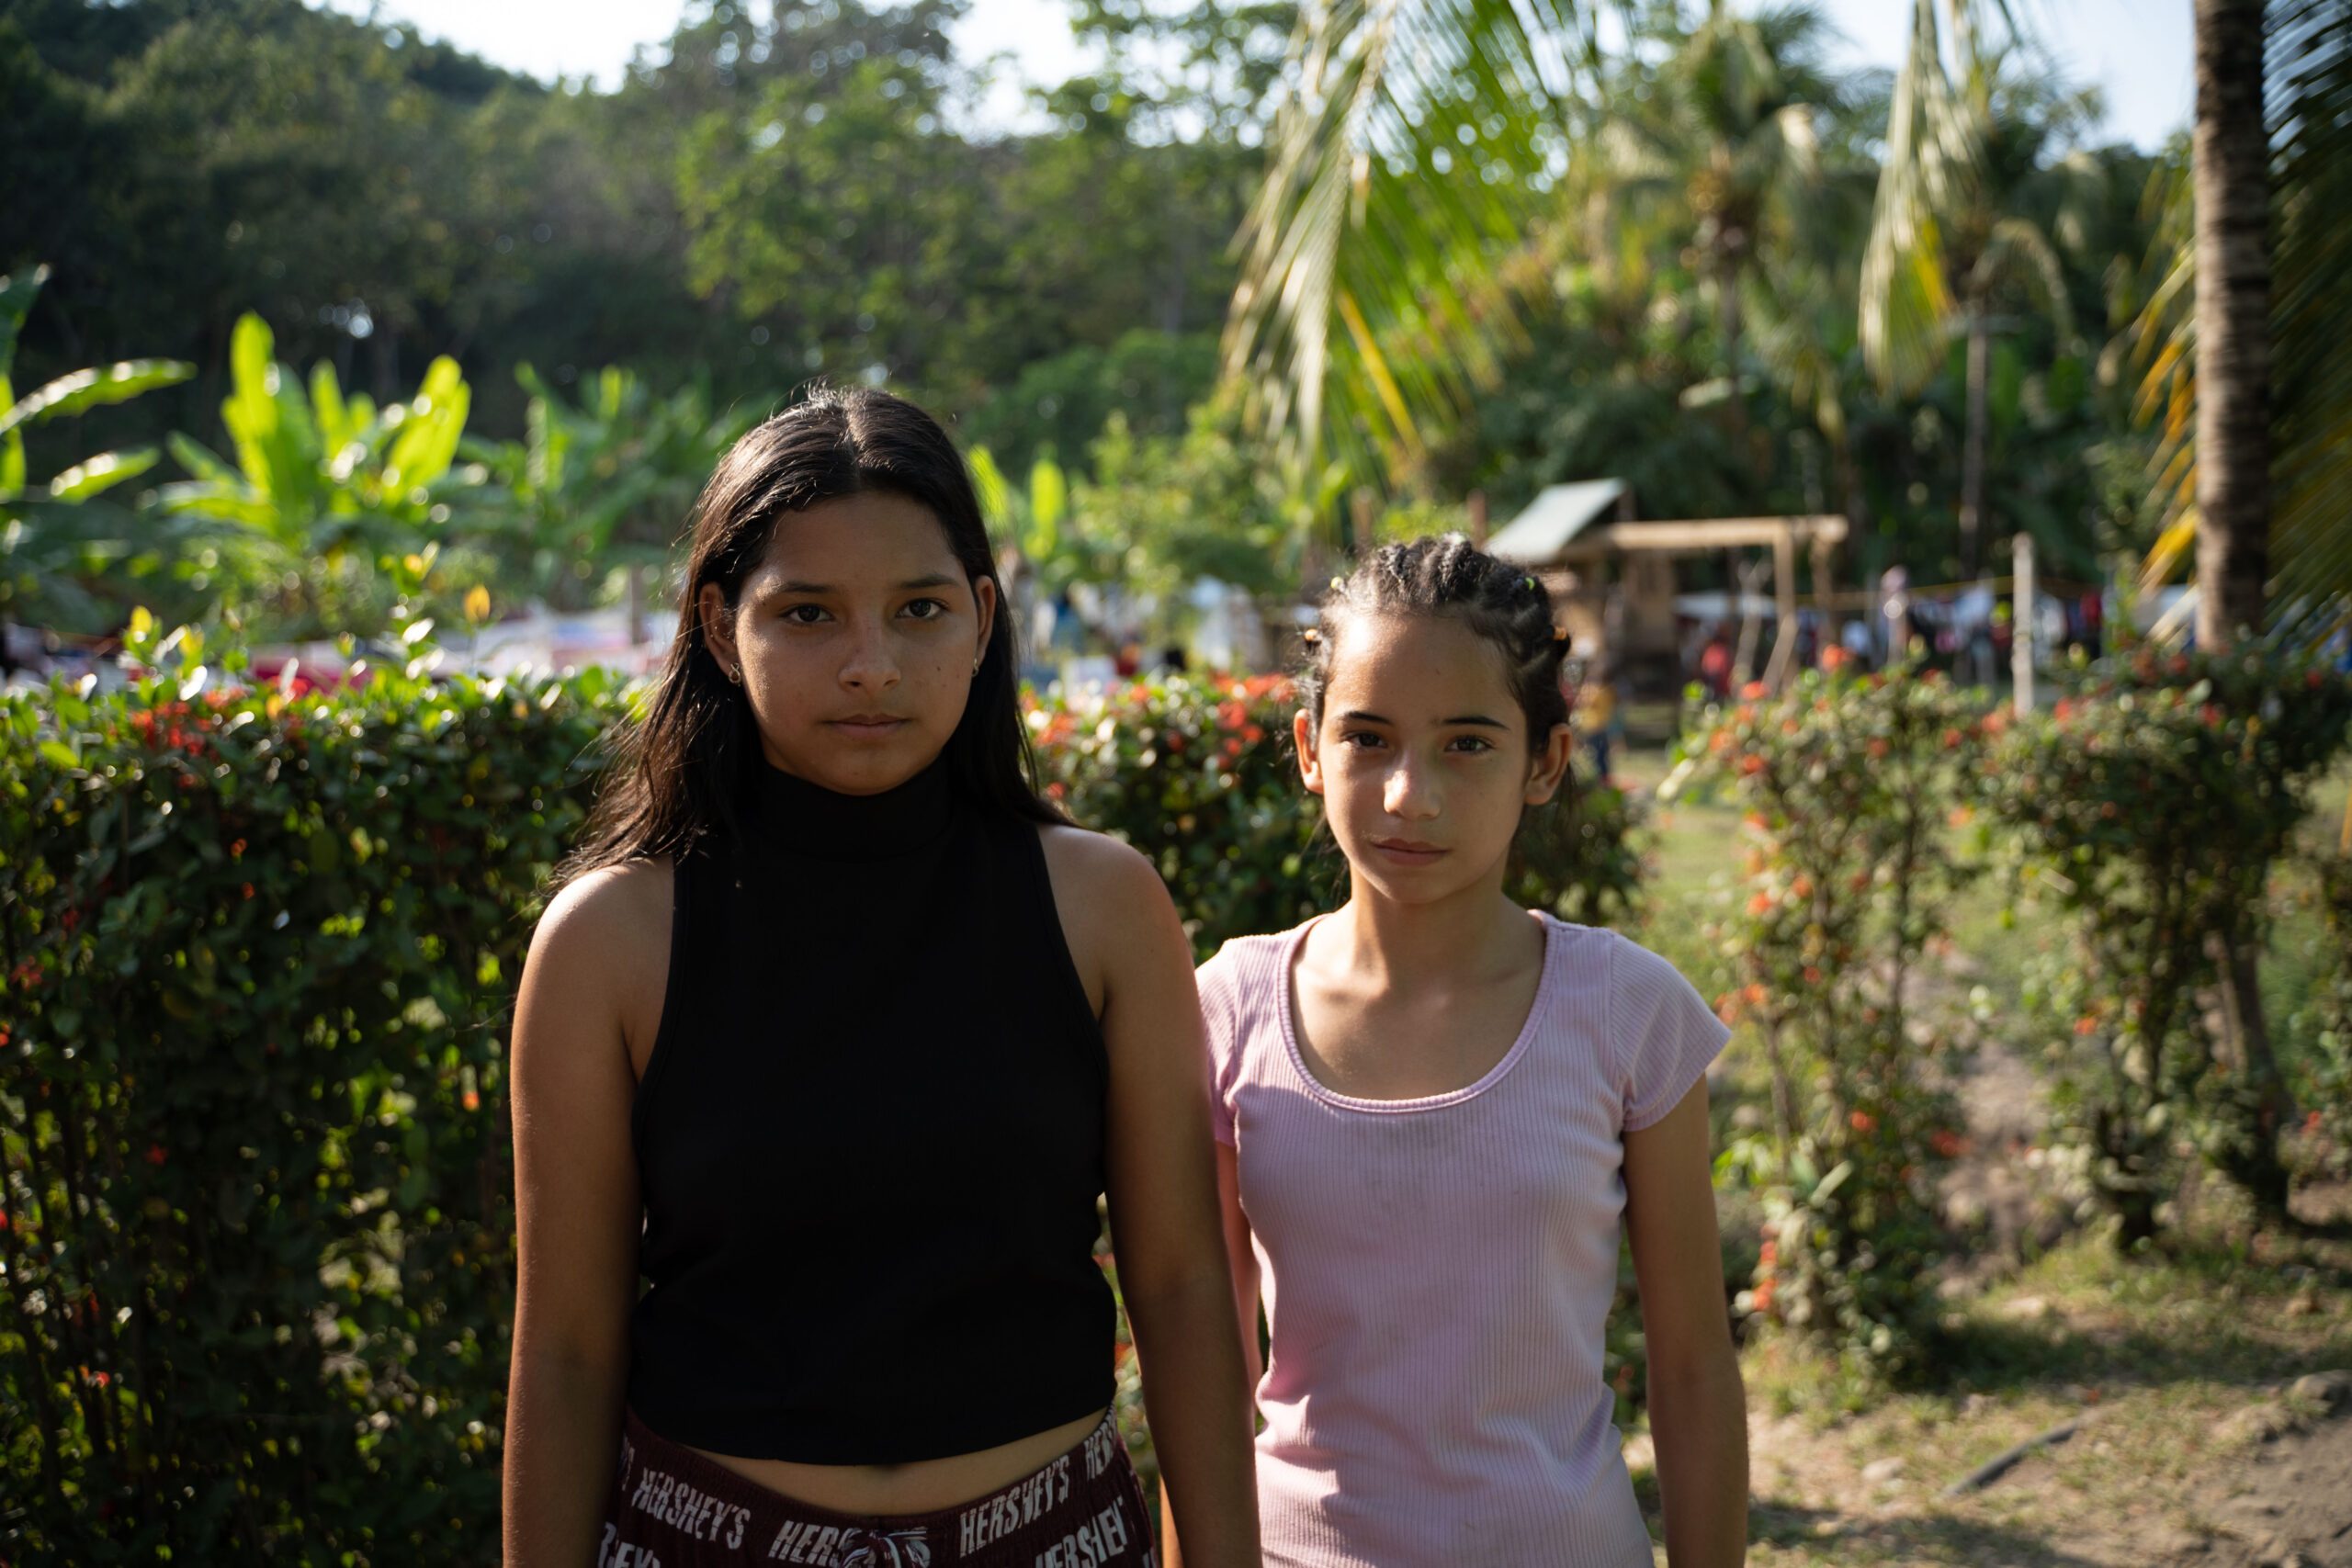 Migrant girls in Mexico